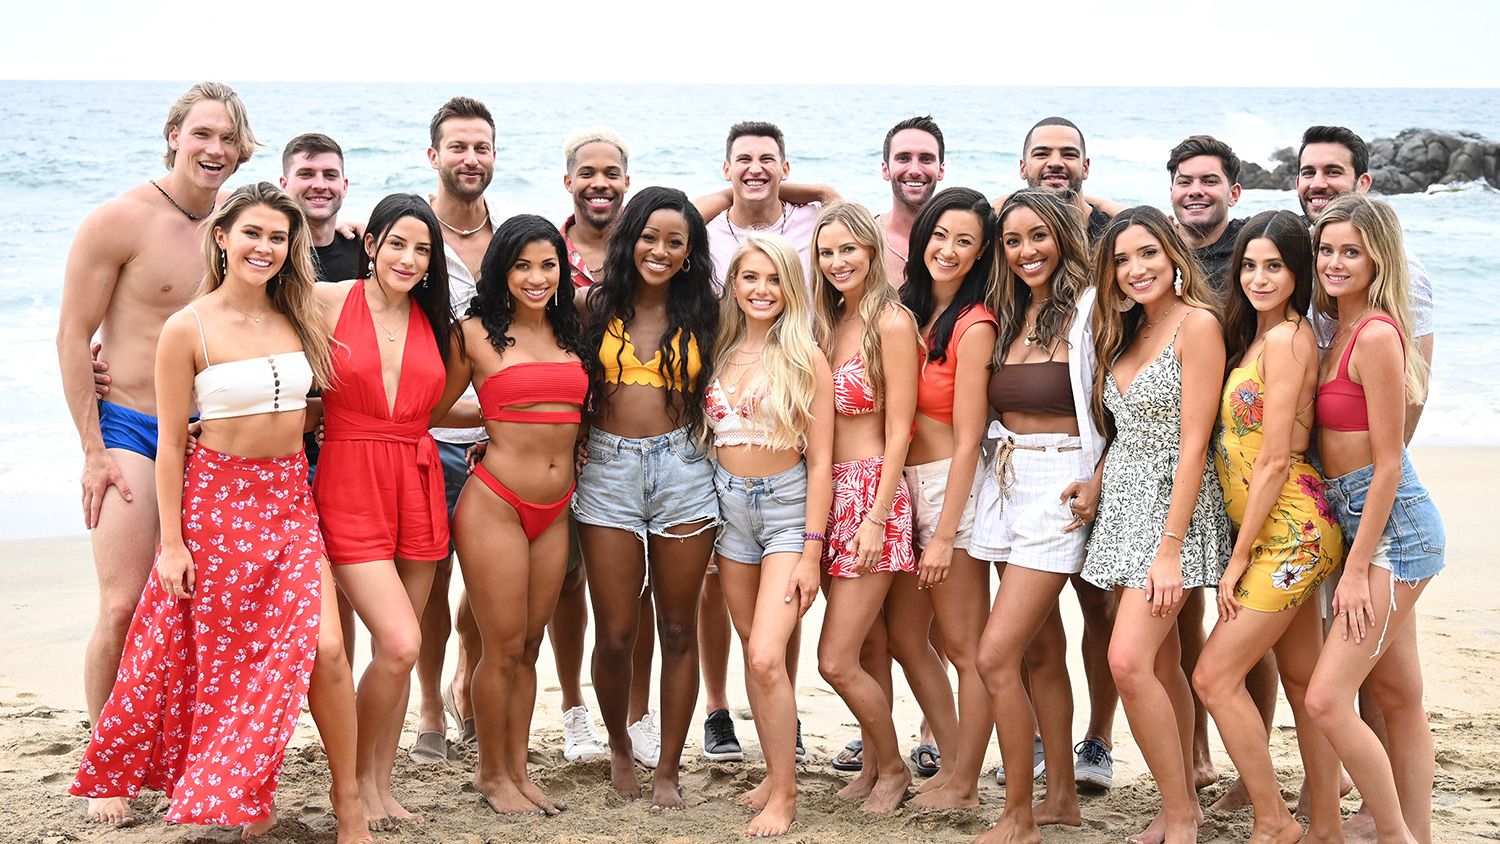 Bachelor in Paradise Season 8 Episode 12: Release Date & Streaming Guide